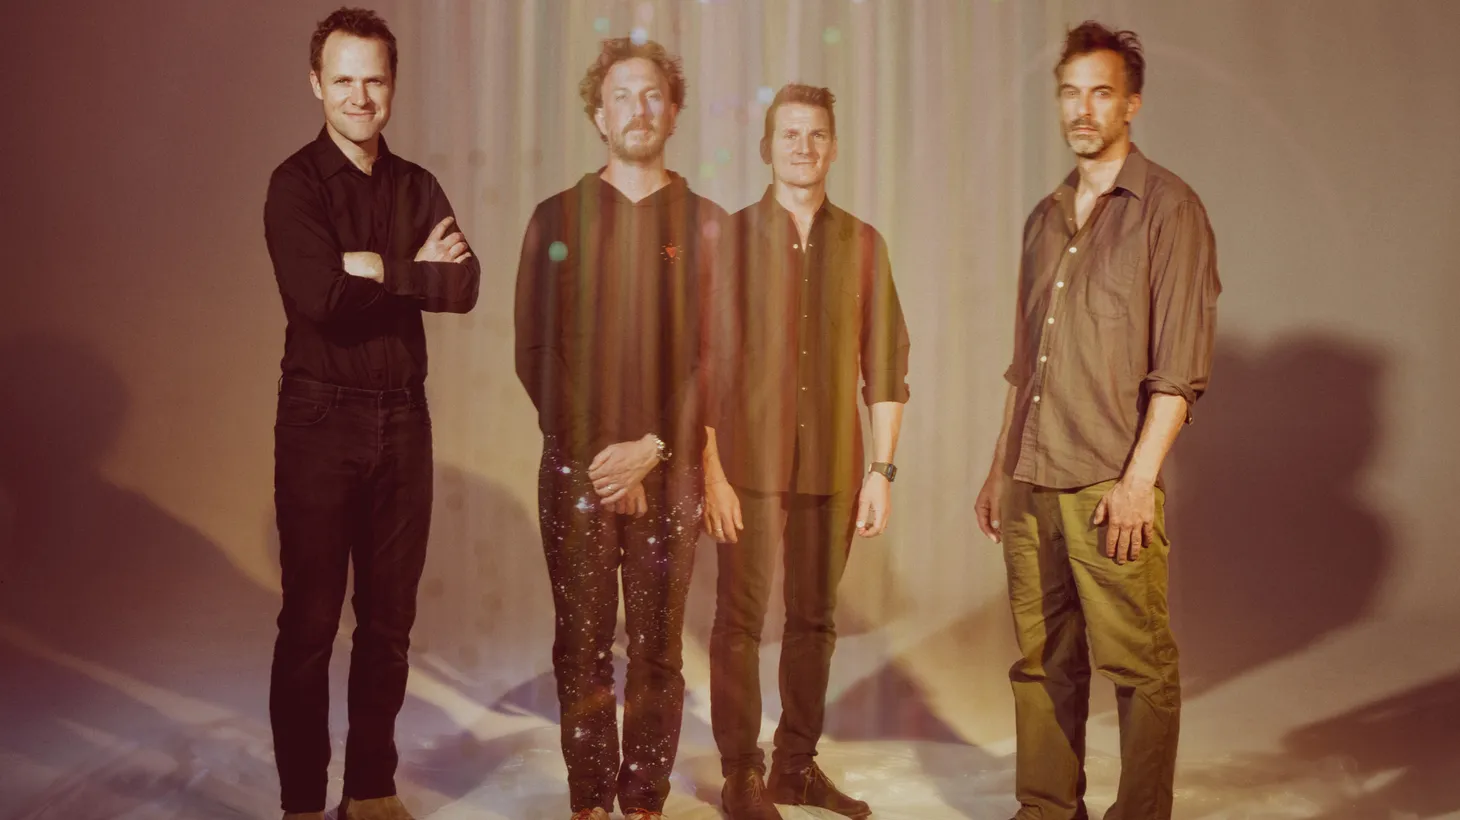 Boston indie rockers Guster join us in live performance on the heels of the release of their eighth studio album Look Alive.